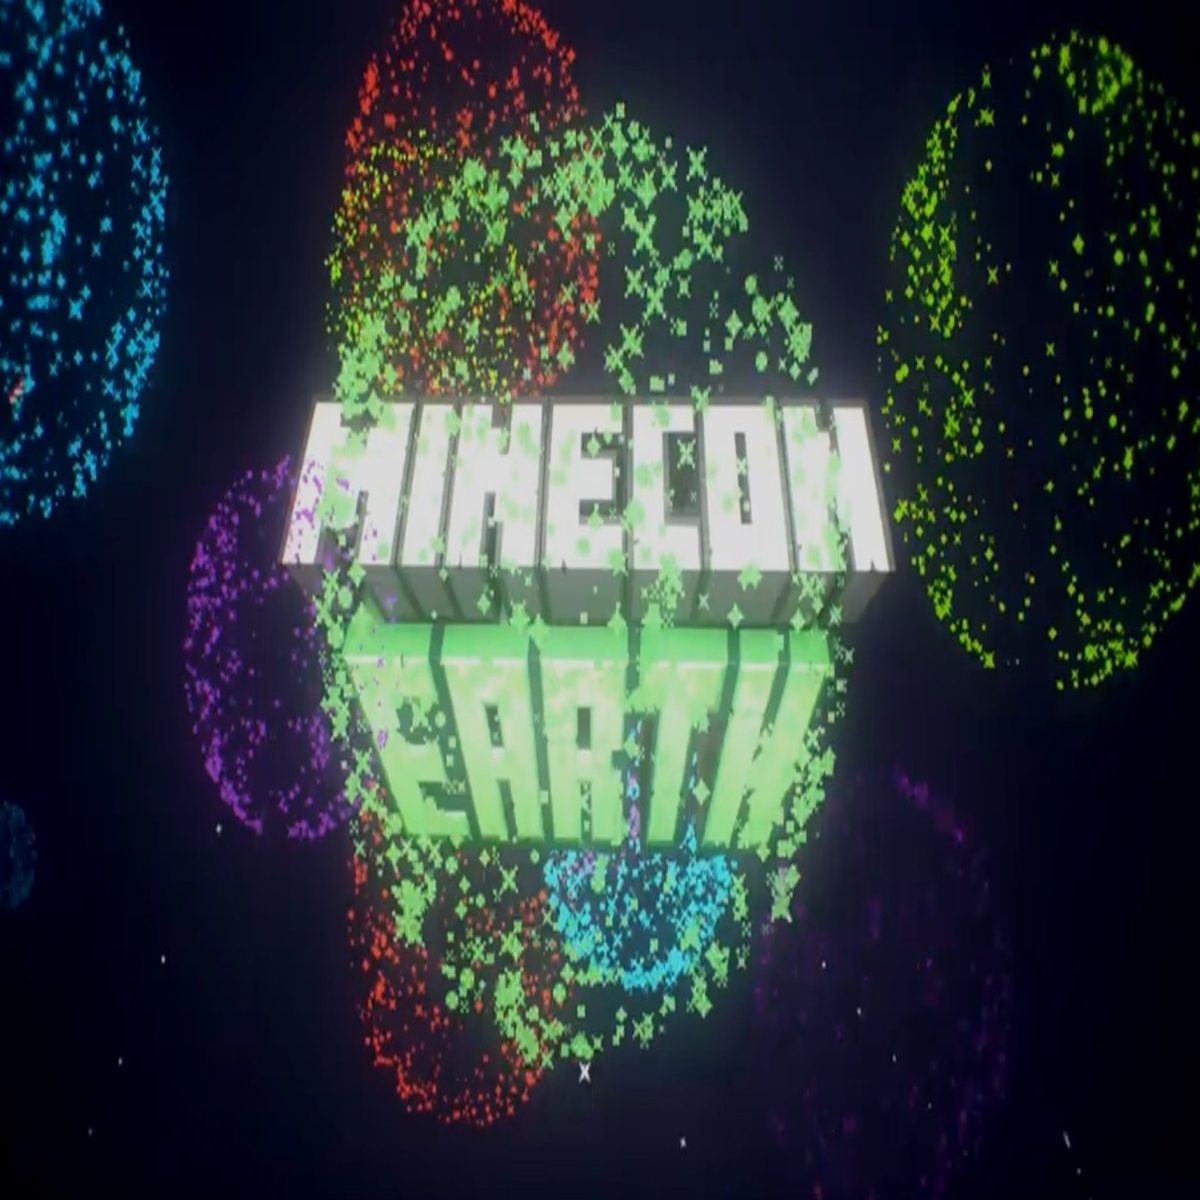 MINECON Earth: New Details!